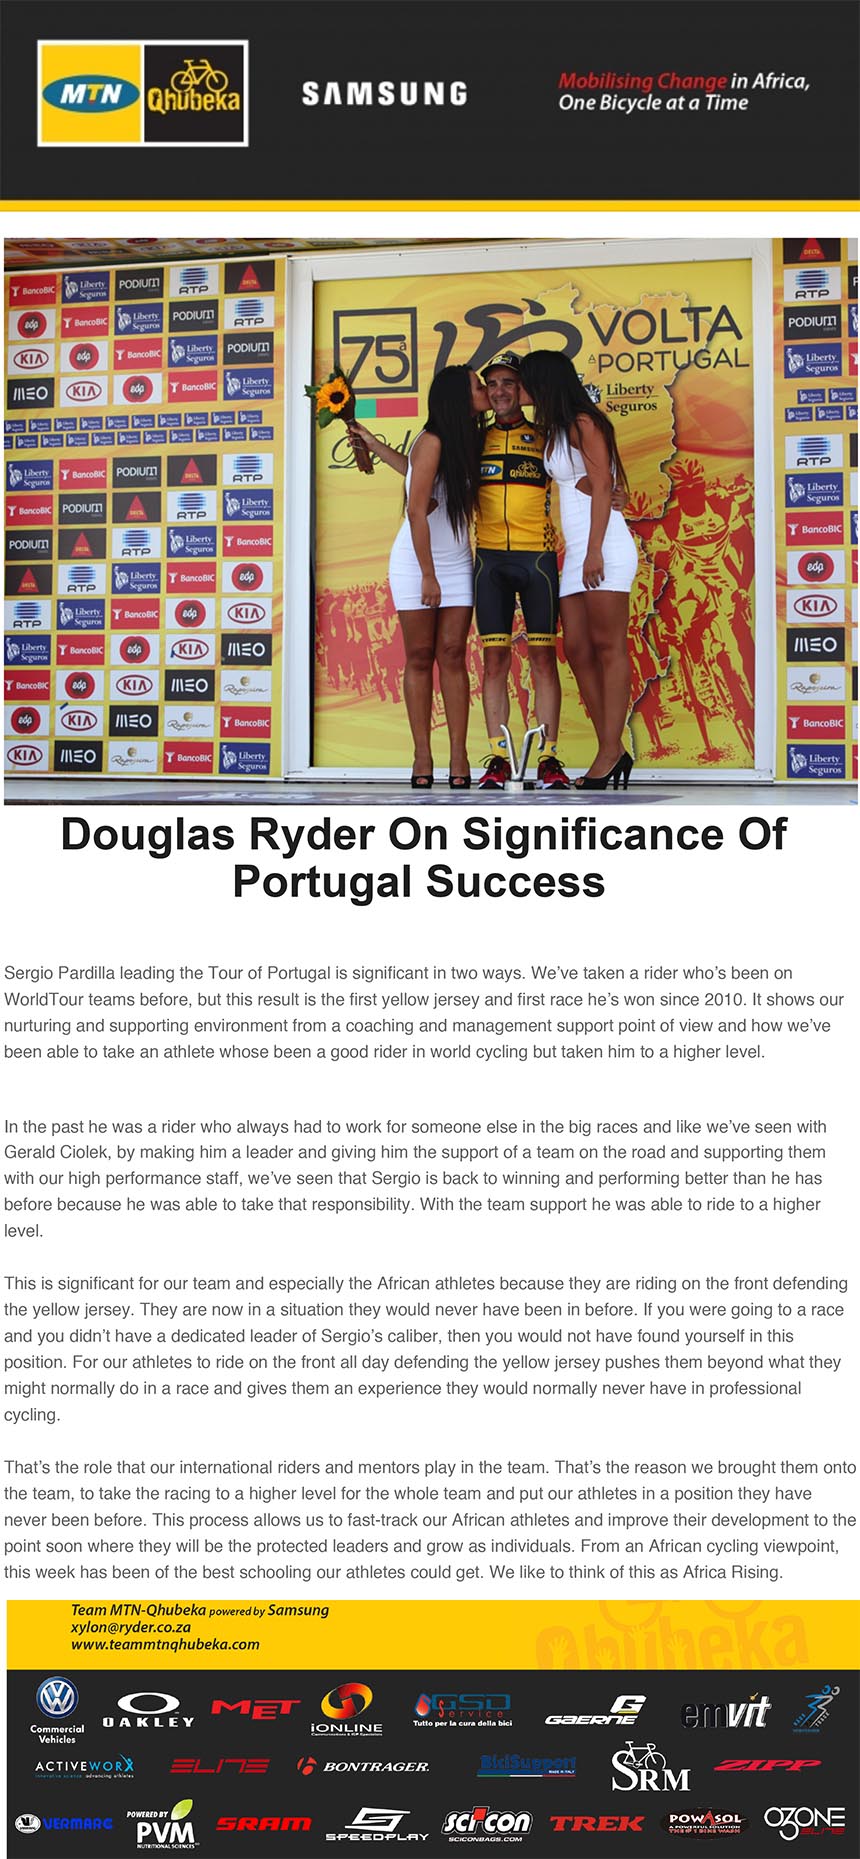 Douglas Ryder On Significance Of
Portugal Success
Sergio Pardilla leading the Tour of Portugal is significant in two ways. We’ve taken a rider who’s been on
WorldTour teams before, but this result is the first yellow jersey and first race he’s won since 2010. It shows our
nurturing and supporting environment from a coaching and management support point of view and how we’ve
been able to take an athlete whose been a good rider in world cycling but taken him to a higher level.
In the past he was a rider who always had to work for someone else in the big races and like we’ve seen with
15/08/13 09:24
http://posta26a.mailbeta.libero.it/cp/MailMessageBody.jsp?th=d109d2&pid=be4664e9c49f88f1f3193dfed7532620 Pagina 2 di 3
Gerald Ciolek, by making him a leader and giving him the support of a team on the road and supporting them
with our high performance staff, we’ve seen that Sergio is back to winning and performing better than he has
before because he was able to take that responsibility. With the team support he was able to ride to a higher
level.
This is significant for our team and especially the African athletes because they are riding on the front defending
the yellow jersey. They are now in a situation they would never have been in before. If you were going to a race
and you didn’t have a dedicated leader of Sergio’s caliber, then you would not have found yourself in this
position. For our athletes to ride on the front all day defending the yellow jersey pushes them beyond what they
might normally do in a race and gives them an experience they would normally never have in professional
cycling.
That’s the role that our international riders and mentors play in the team. That’s the reason we brought them onto
the team, to take the racing to a higher level for the whole team and put our athletes in a position they have
never been before. This process allows us to fast-track our African athletes and improve their development to the
point soon where they will be the protected leaders and grow as individuals. From an African cycling viewpoint,
this week has been of the best schooling our athletes could get. We like to think of this as Africa Rising.
Douglas Ryder
Team Principal
Team MTN-Qhubeka p/b Samsung
follow